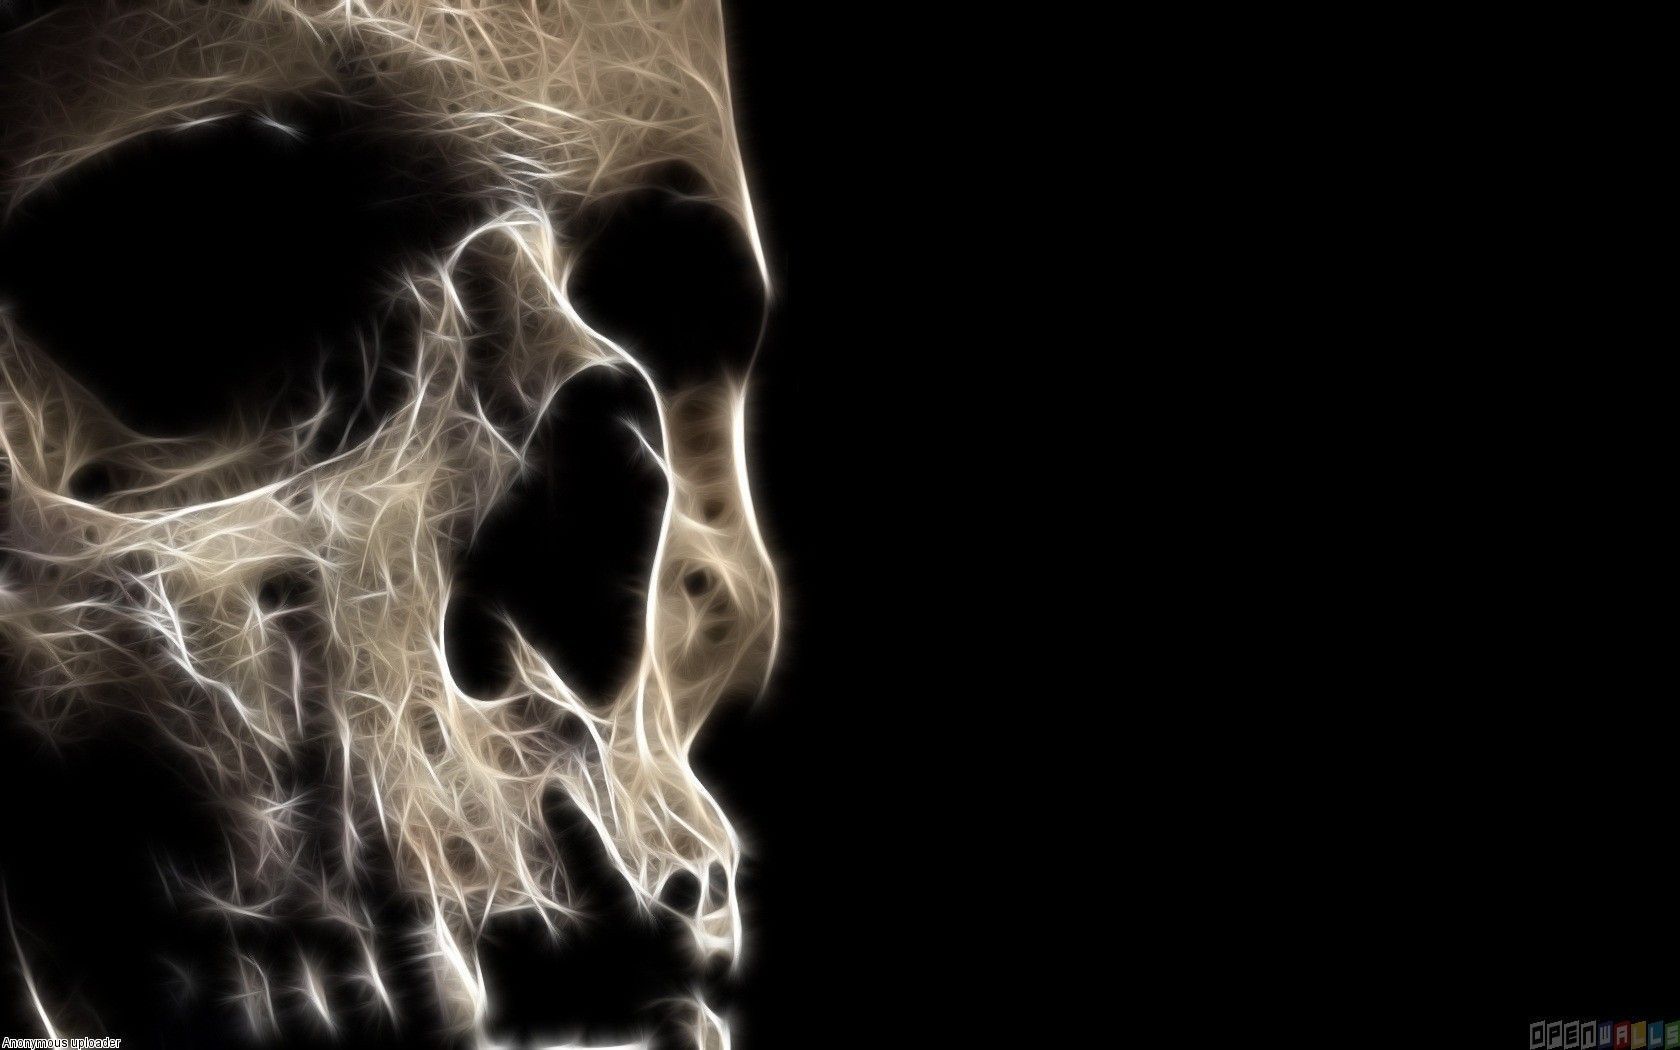 Scary skull wallpapers - Open Walls